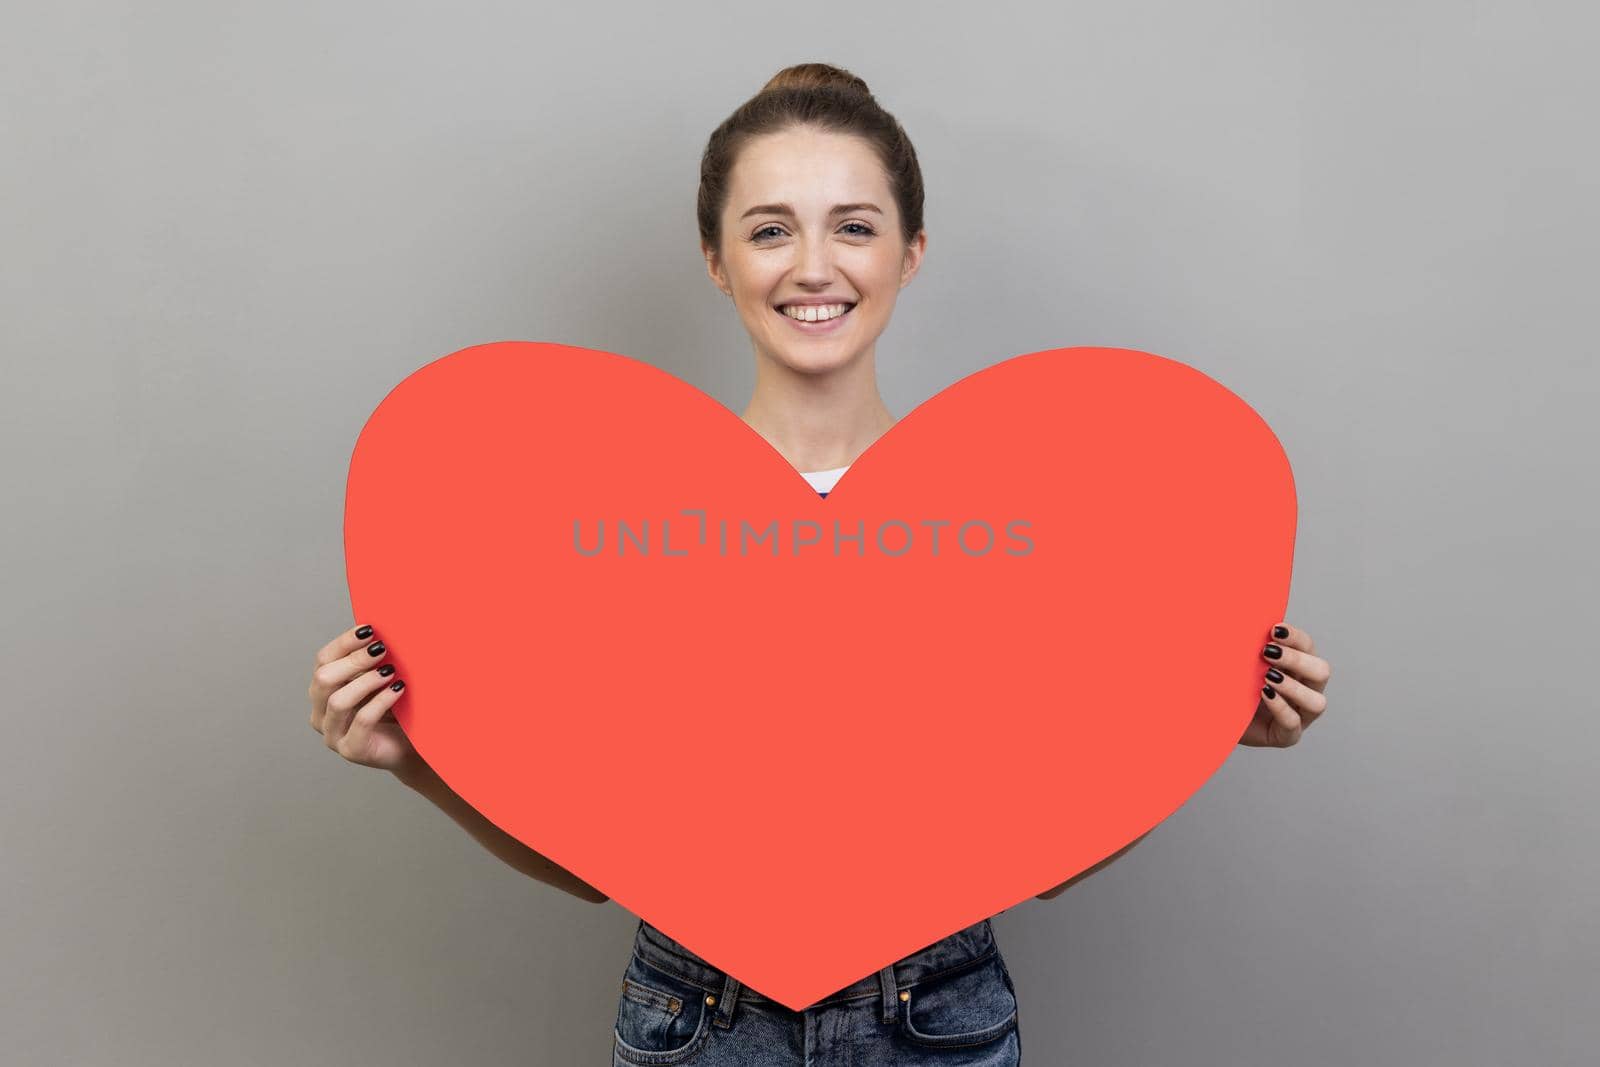 Portrait of happy woman smiling at camera and holding big red heart, symbol of love and affection, expressing i love you and romantic feelings. Indoor studio shot isolated on gray background.